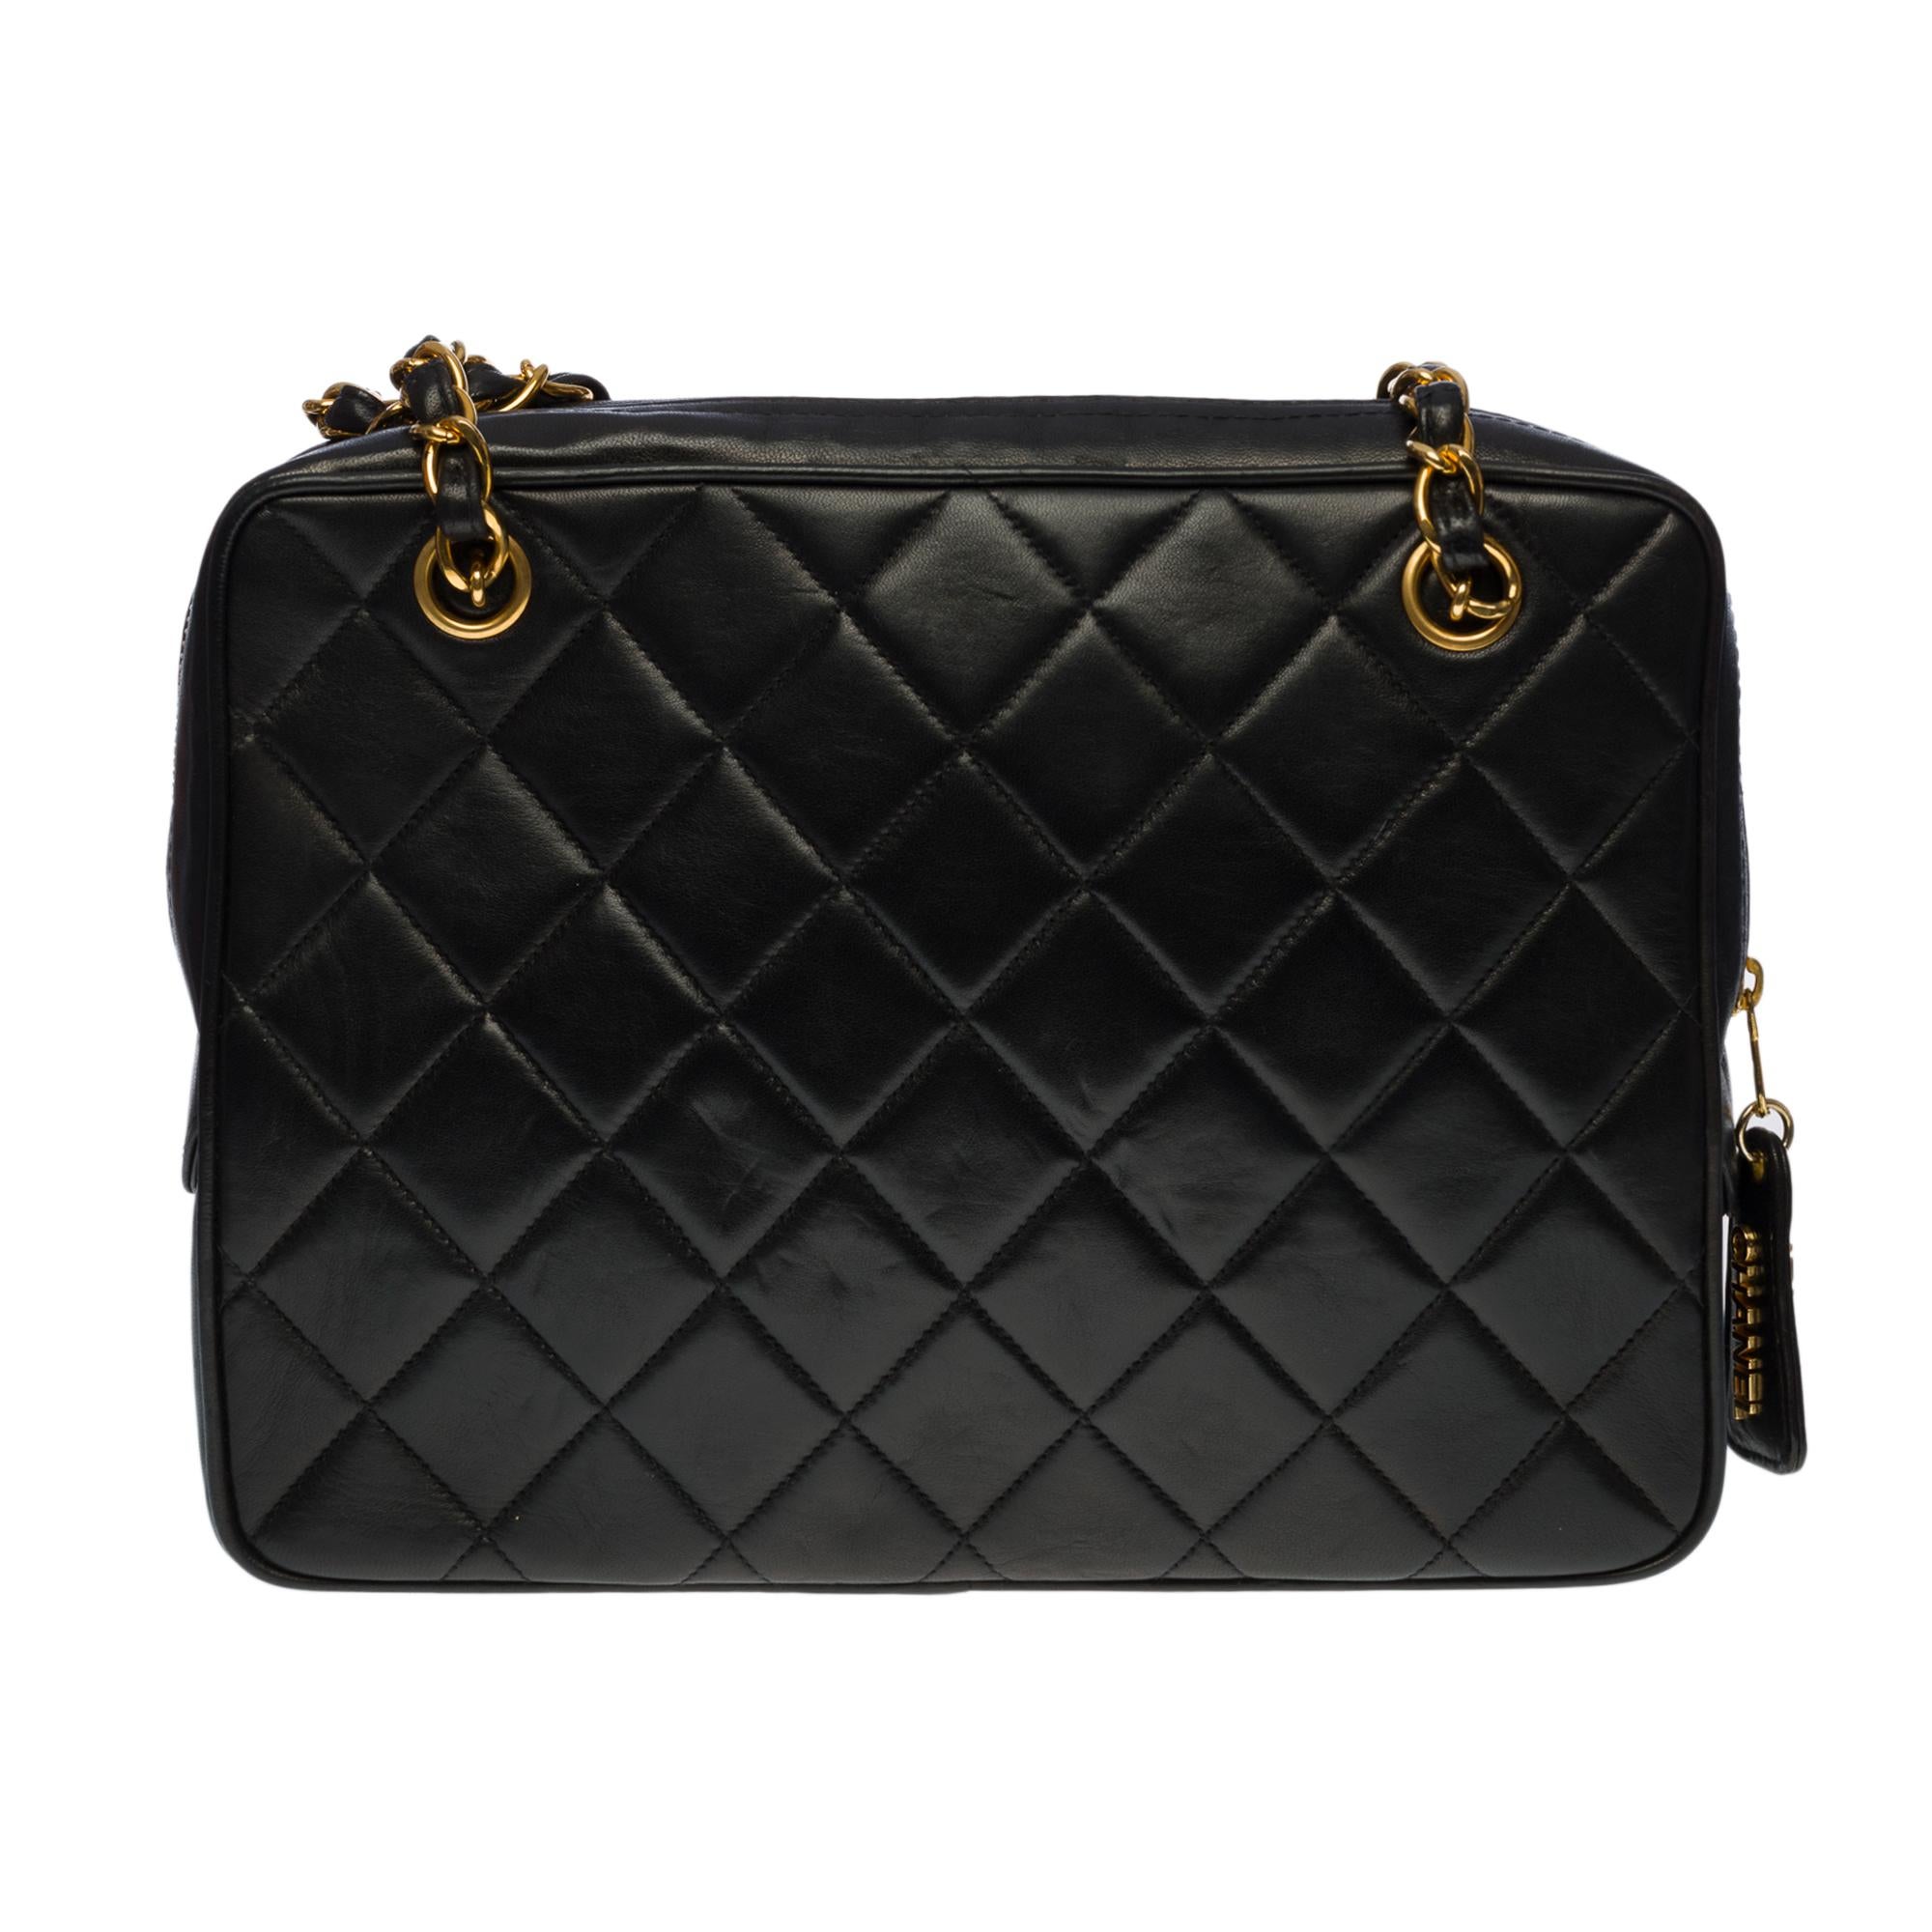 Sublime Chanel Camera Front Pocket GM shoulder bag in black quilted lambskin leather, gold-tone hardware, two gold-tone metal chain handles interlaced with black leather for shoulder support
Zipper closure, adorned with a leather pull tab with the